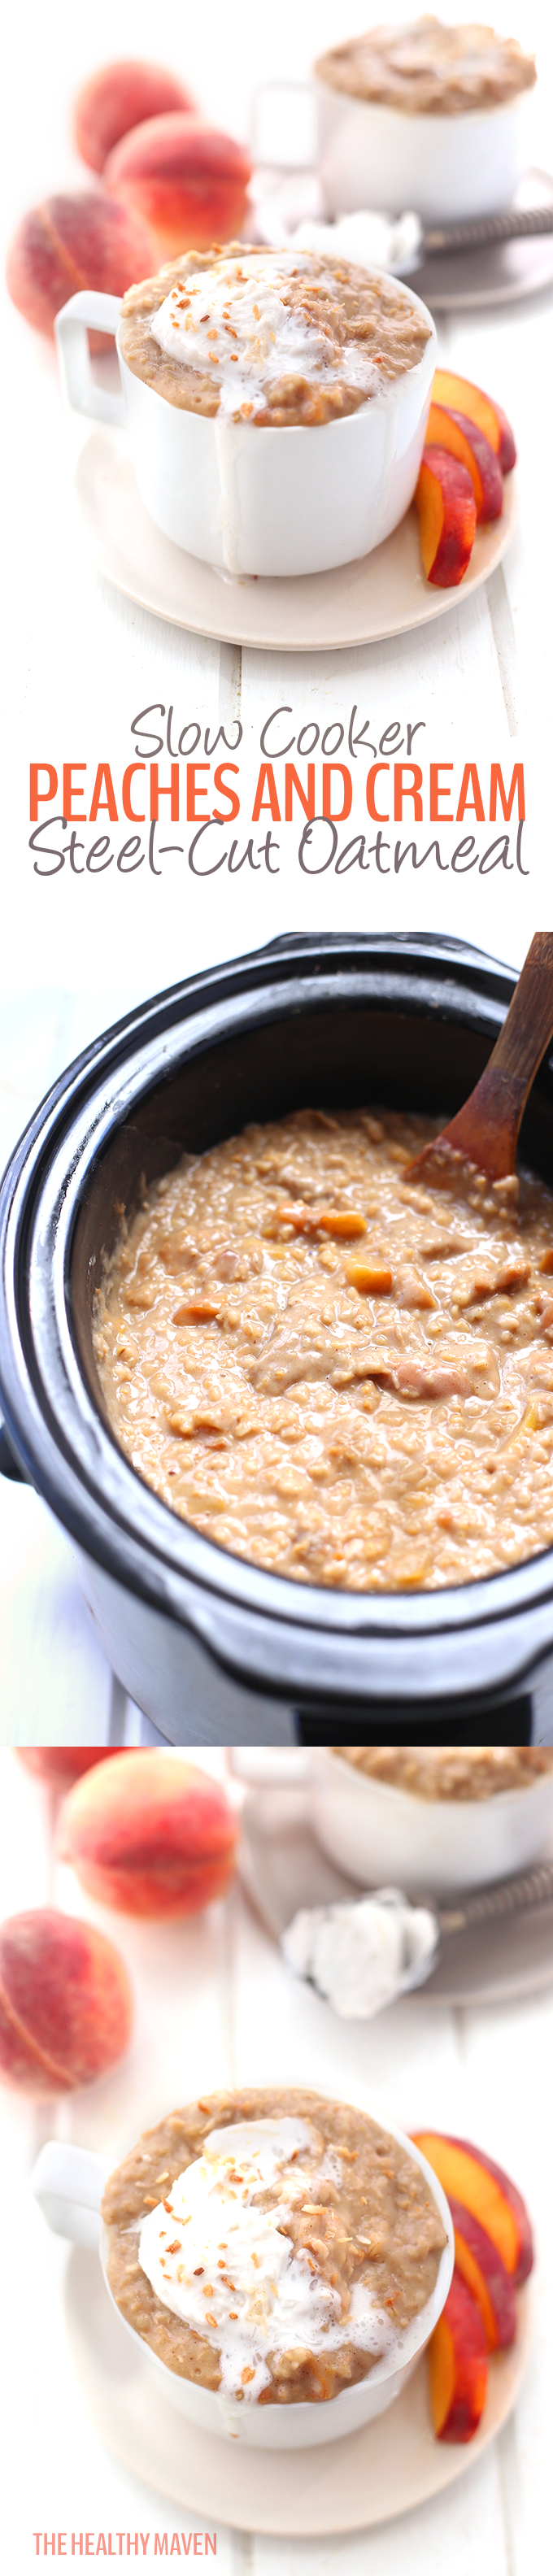 Made with steel-cut oats, fresh peaches and coconut cream this gluten-free and dairy-free, hands-off recipe for slow cooker